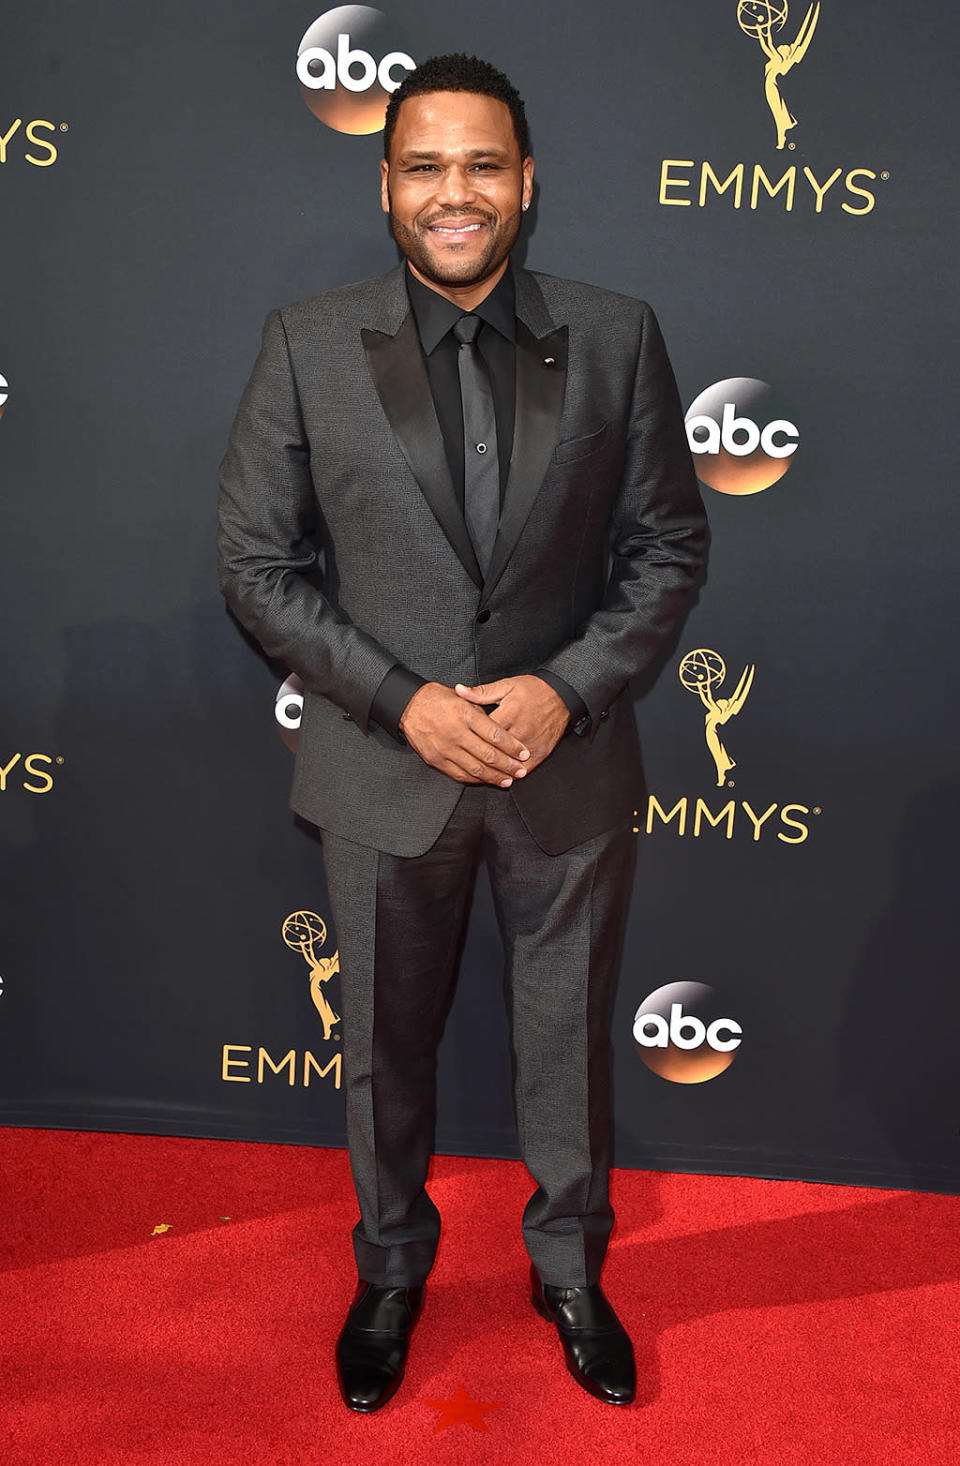 <p>Anthony Anderson arrives at the 68th Emmy Awards at the Microsoft Theater on September 18, 2016 in Los Angeles, Calif. (Photo by Getty Images) </p>